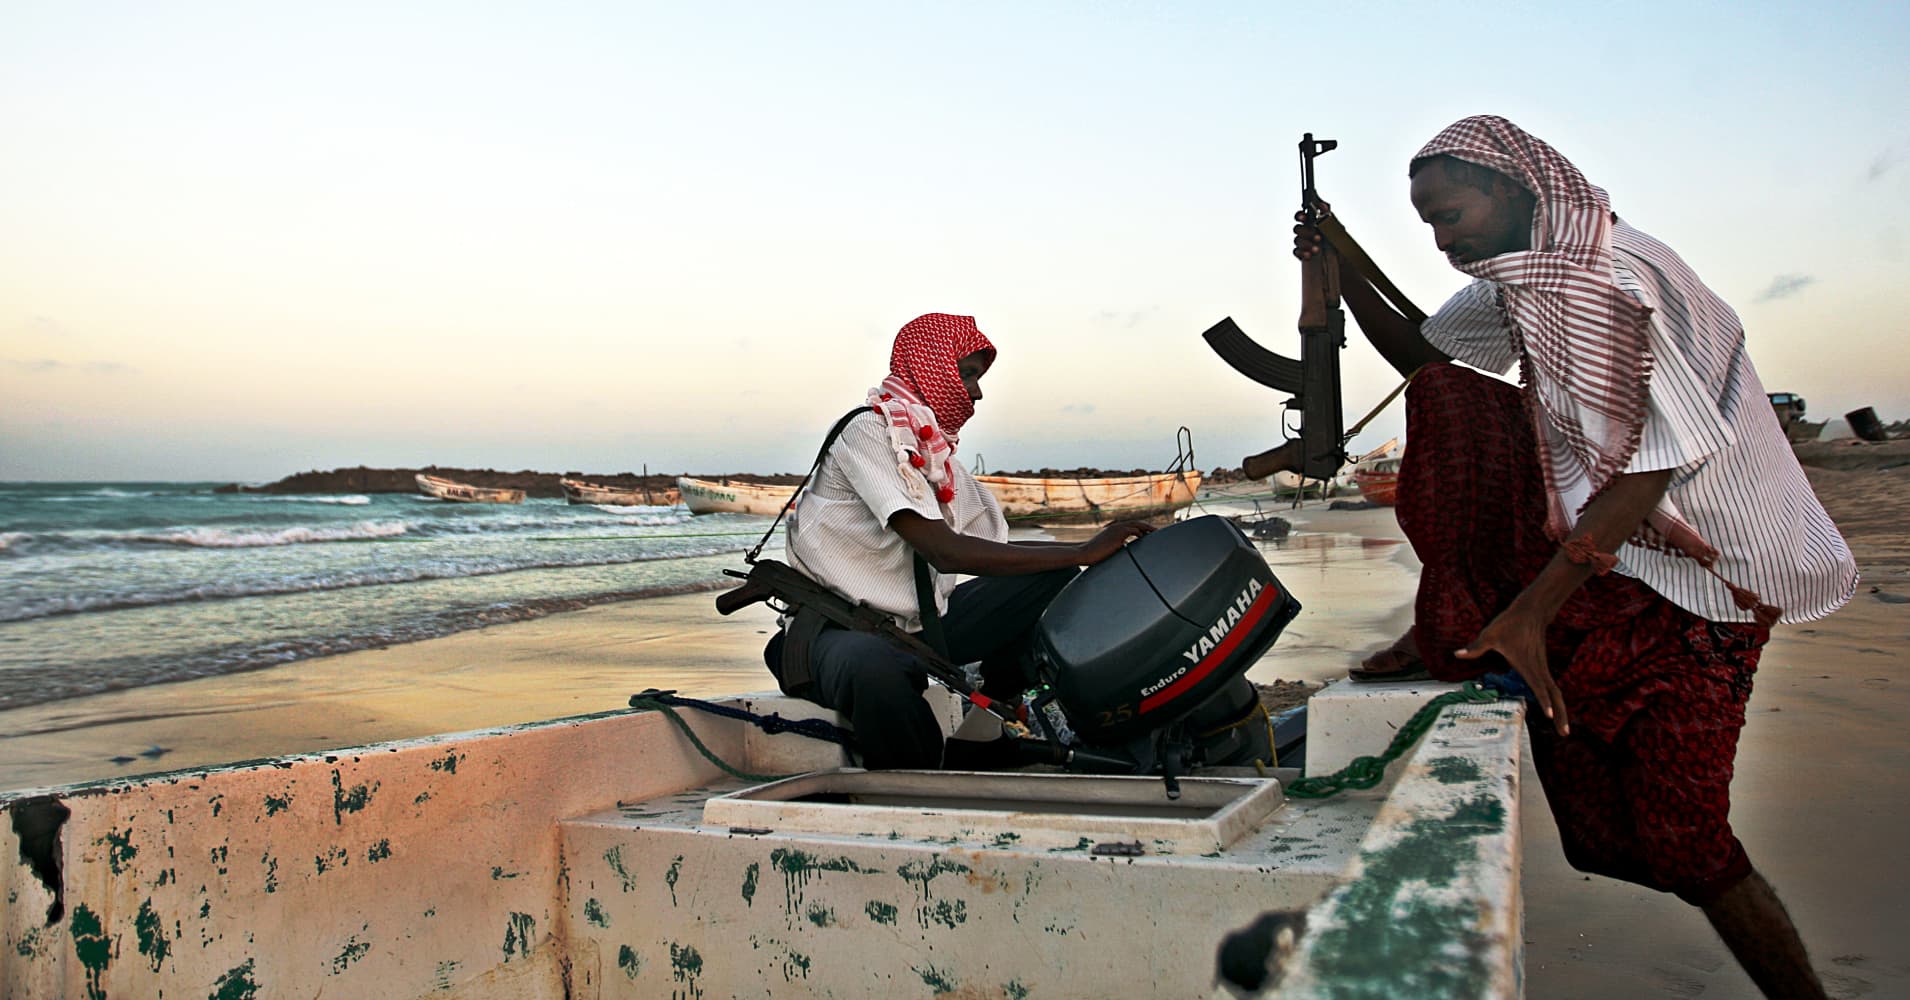 Somali pirates hijack first commercial ship in 5 years Somali Pirate Hijacking